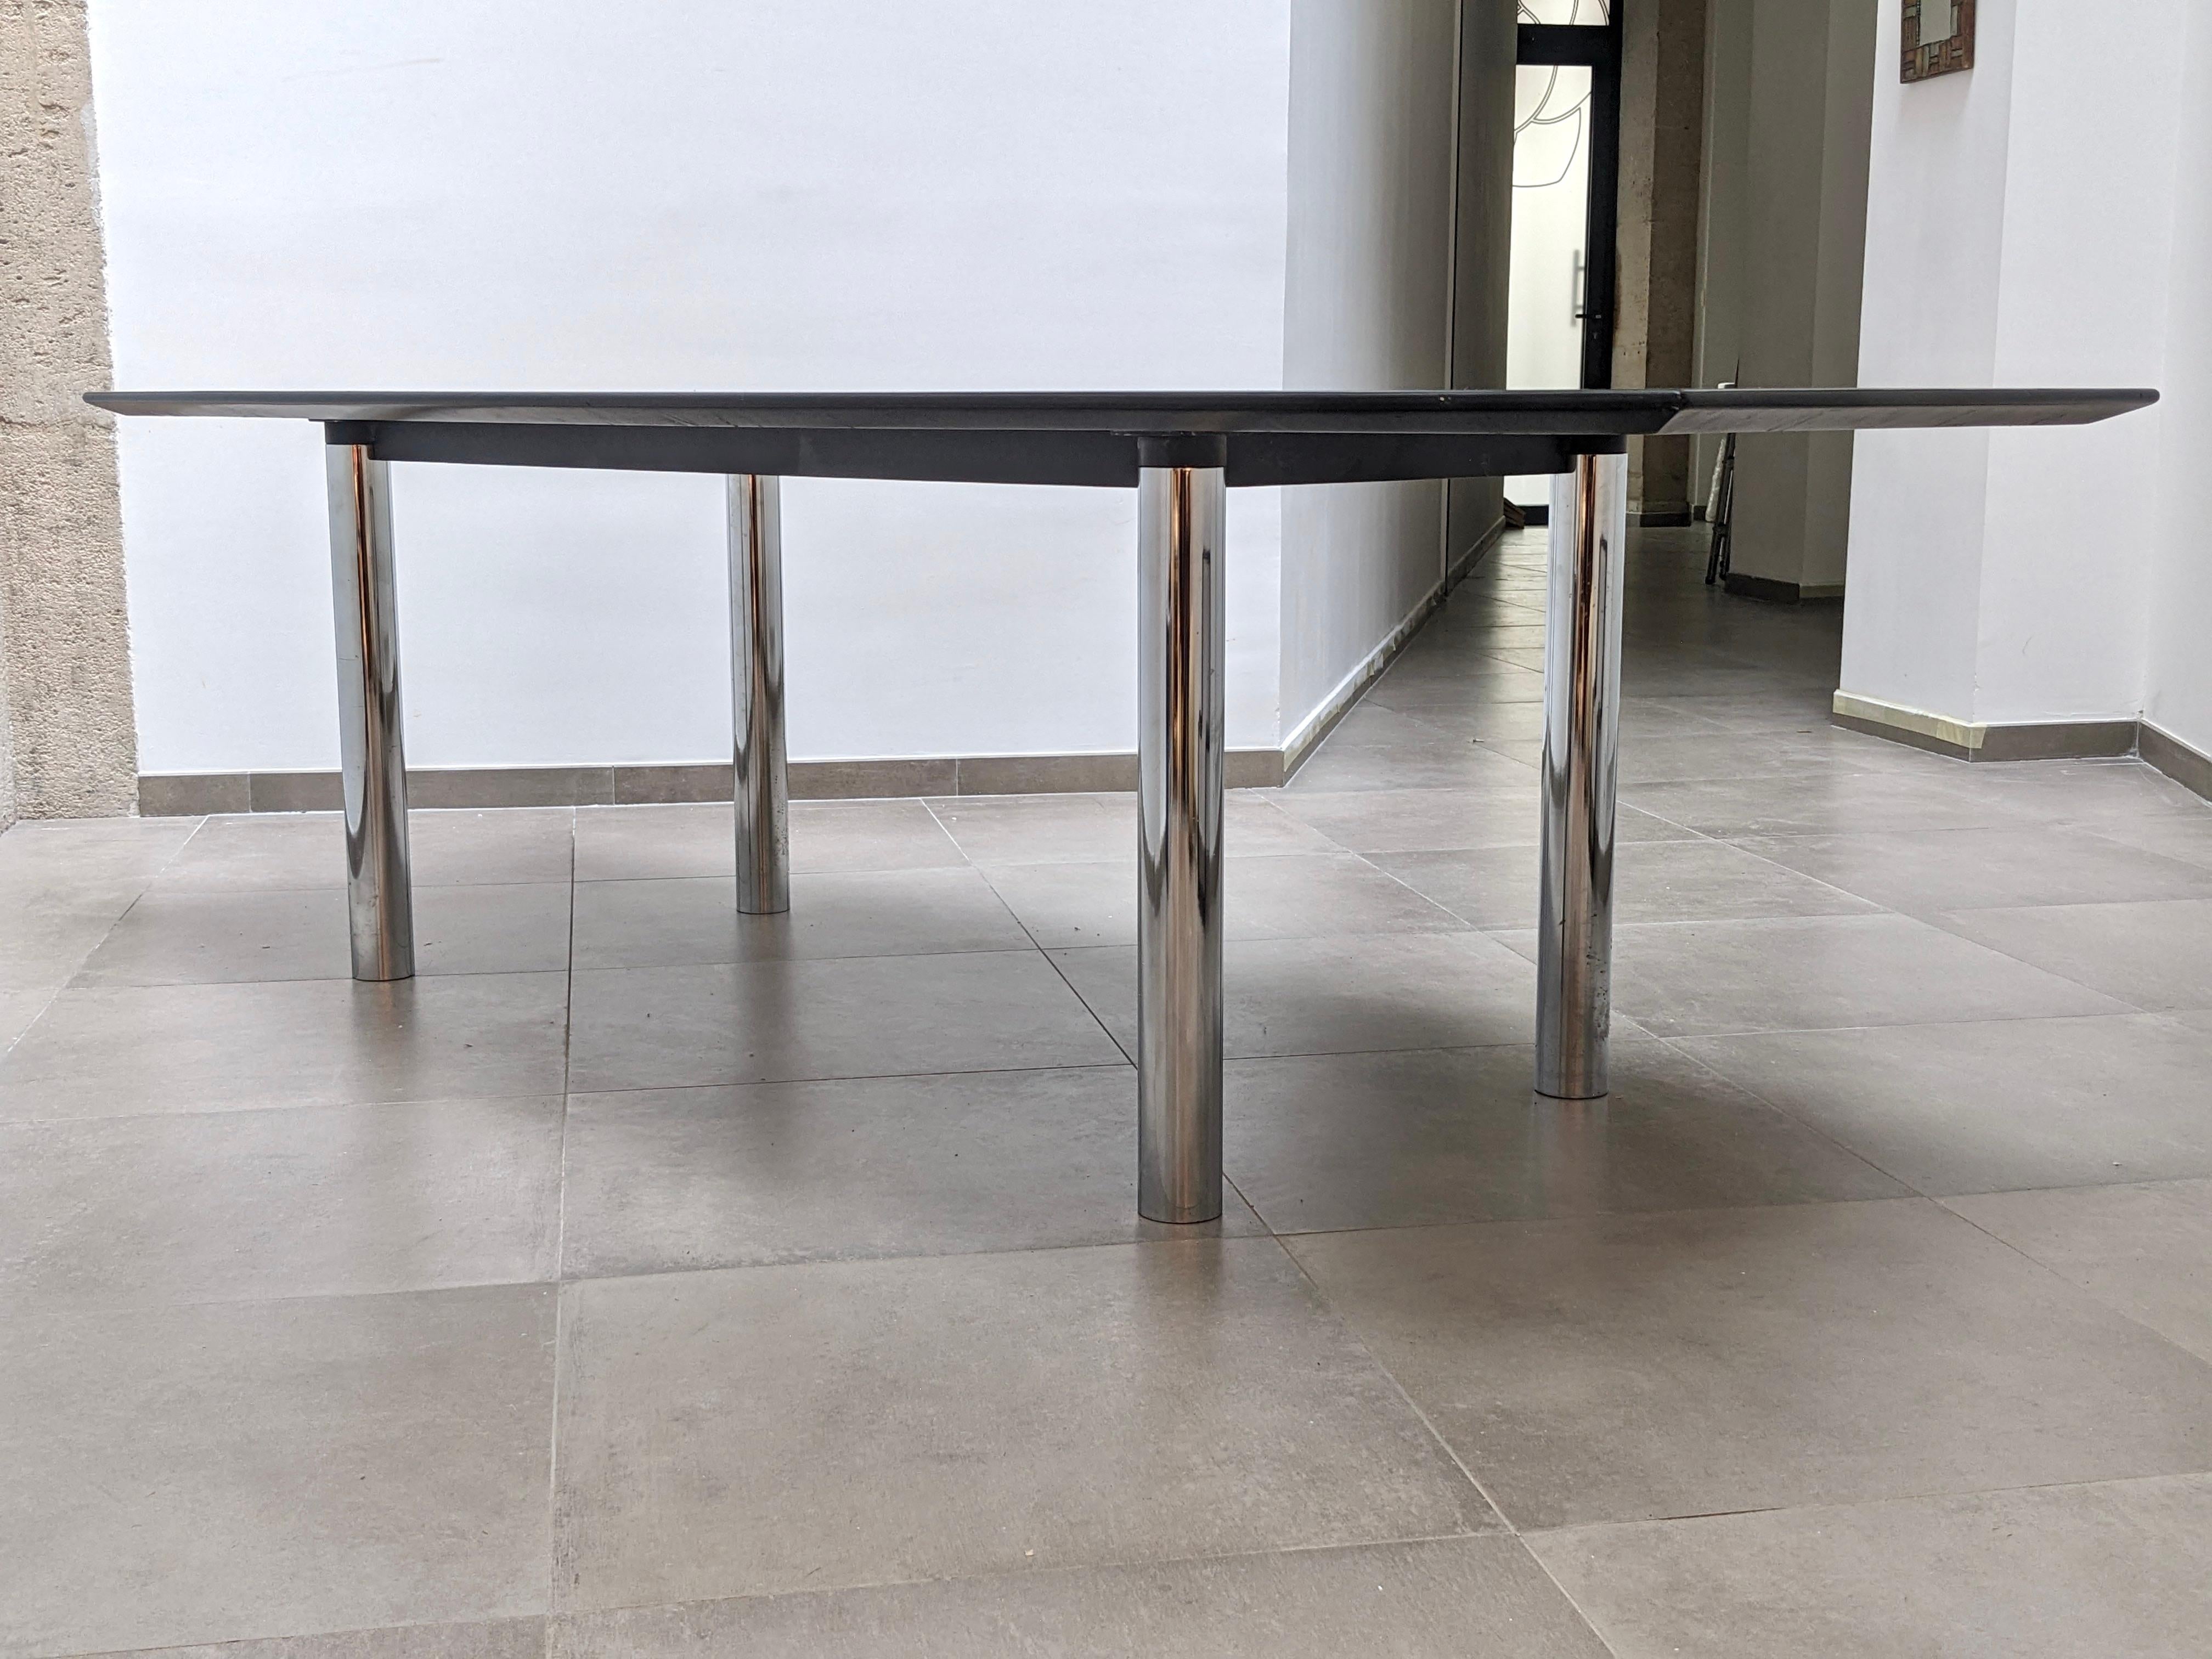 Florence Knoll conference table

circa 1970
Good condition. Used condition. Some scratches on the top and traces of shocks on the edges of the top (see pictures).
Table in the shape of a 